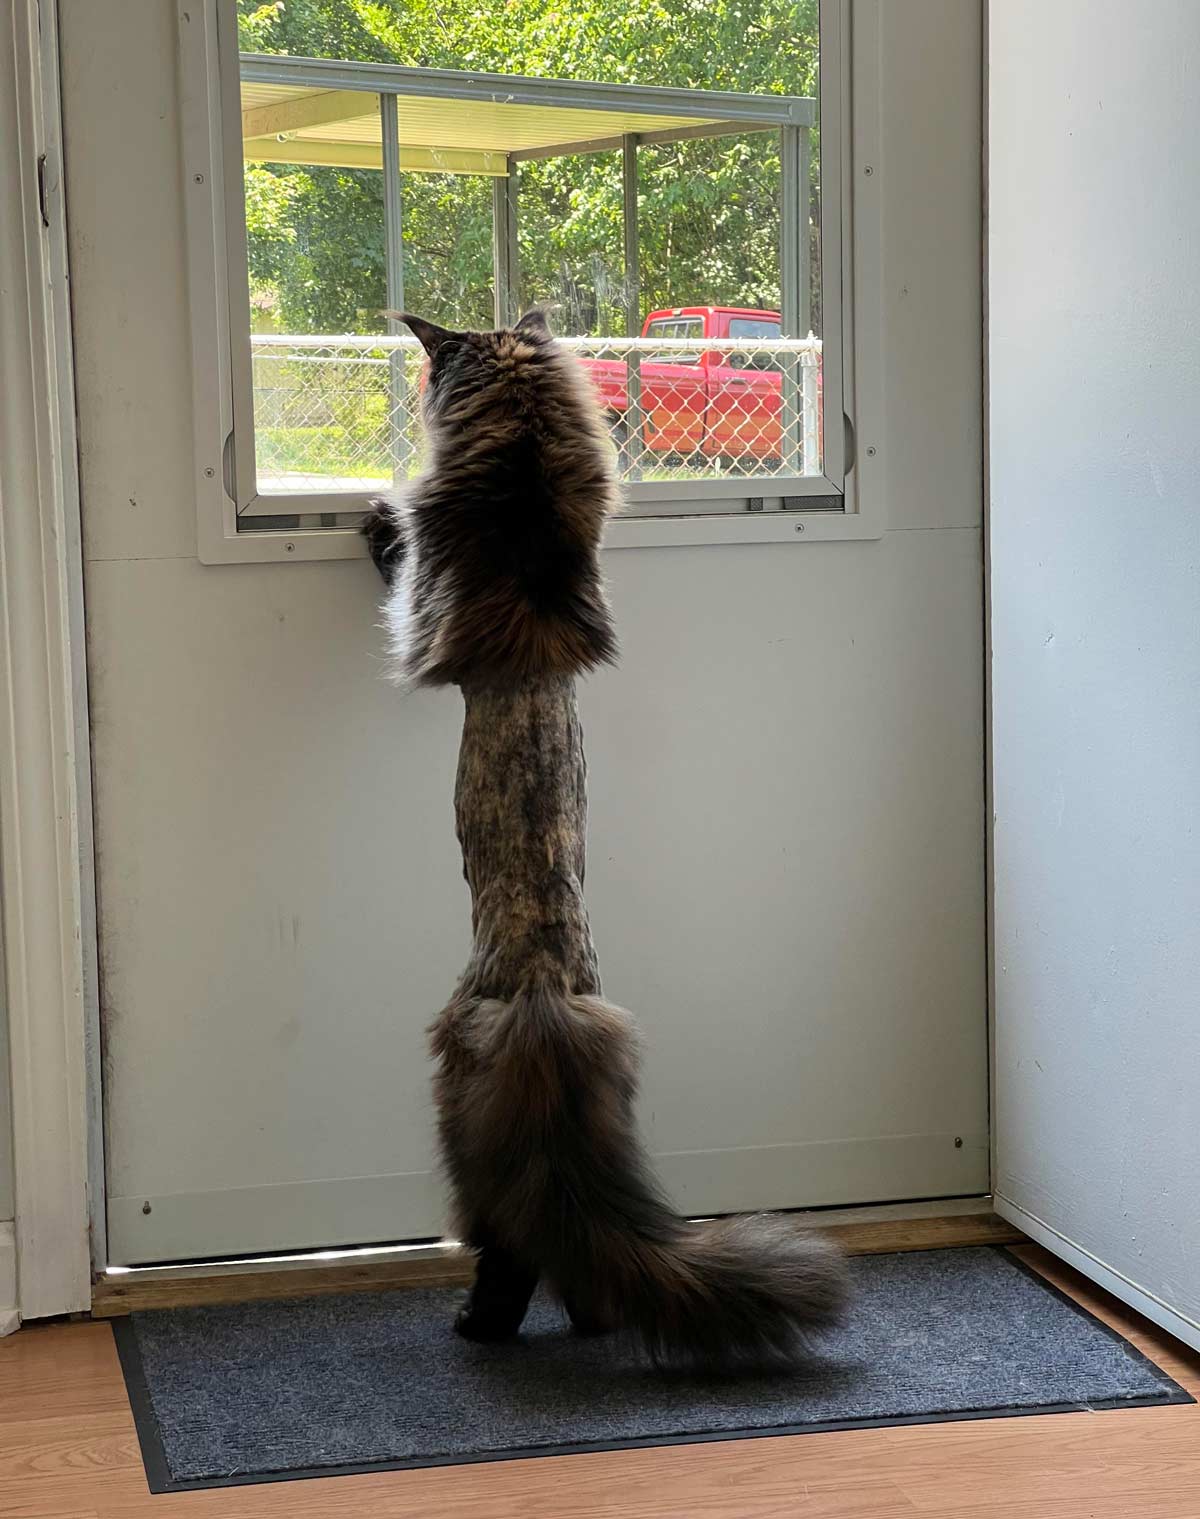 My friends cat got shaved at the vet and now she looks like a game of exquisite corpse